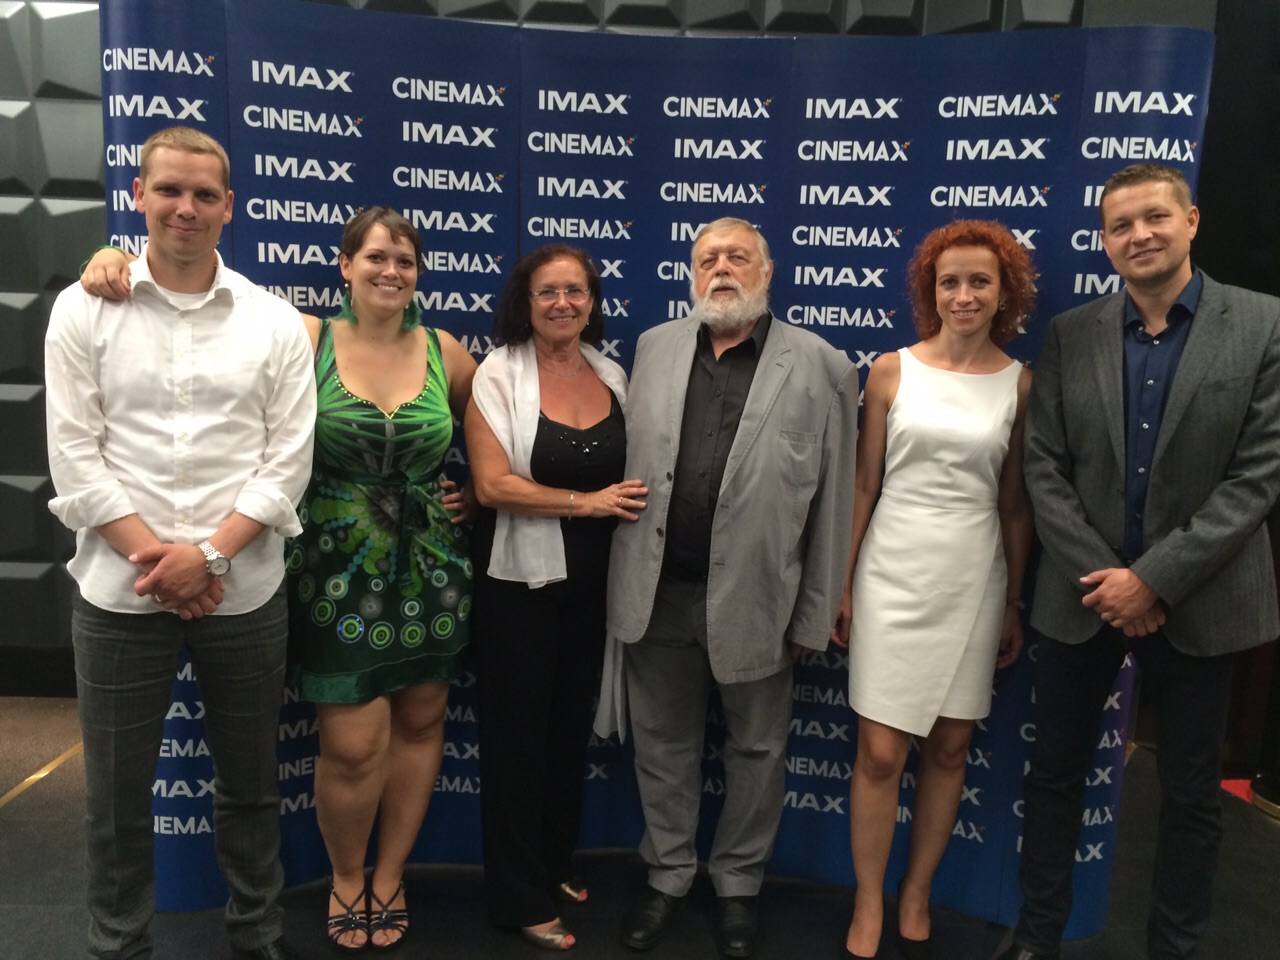 Family photo from the opening of the cinema in Bratislava